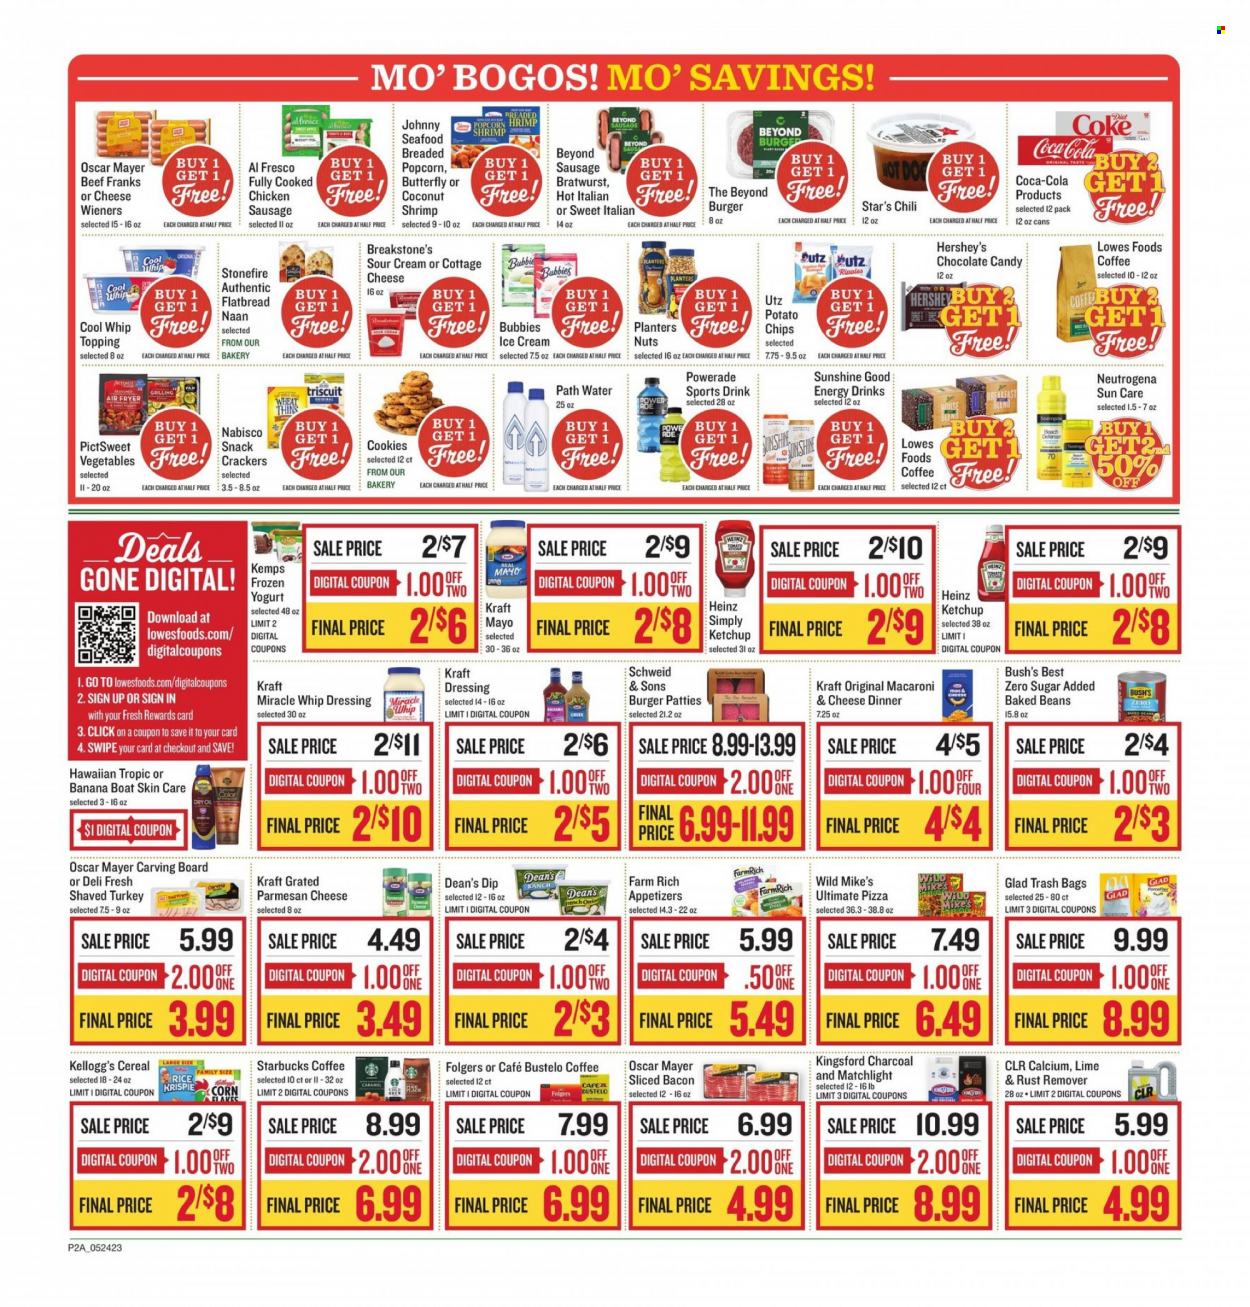 thumbnail - Lowes Foods Flyer - 05/24/2023 - 05/30/2023 - Sales products - flatbread, corn, onion, seafood, shrimps, macaroni & cheese, hot dog, pizza, hamburger, Kraft®, Kingsford, bacon, Oscar Mayer, bratwurst, sausage, chicken sausage, frankfurters, cottage cheese, parmesan, Kemps, Sunshine, Cool Whip, sour cream, mayonnaise, Miracle Whip, dip, ice cream, Hershey's, cookies, crackers, Kellogg's, chocolate candies, Candy, Nabisco, popcorn, topping, Heinz, baked beans, cereals, rice, ketchup, dressing, Planters, Coca-Cola, Powerade, energy drink, Diet Coke, soft drink, Coke, water, coffee, Starbucks, Folgers, turkey, burger patties, Neutrogena, sun care, Hawaiian Tropic, trash bags, charcoal, calcium. Page 2.